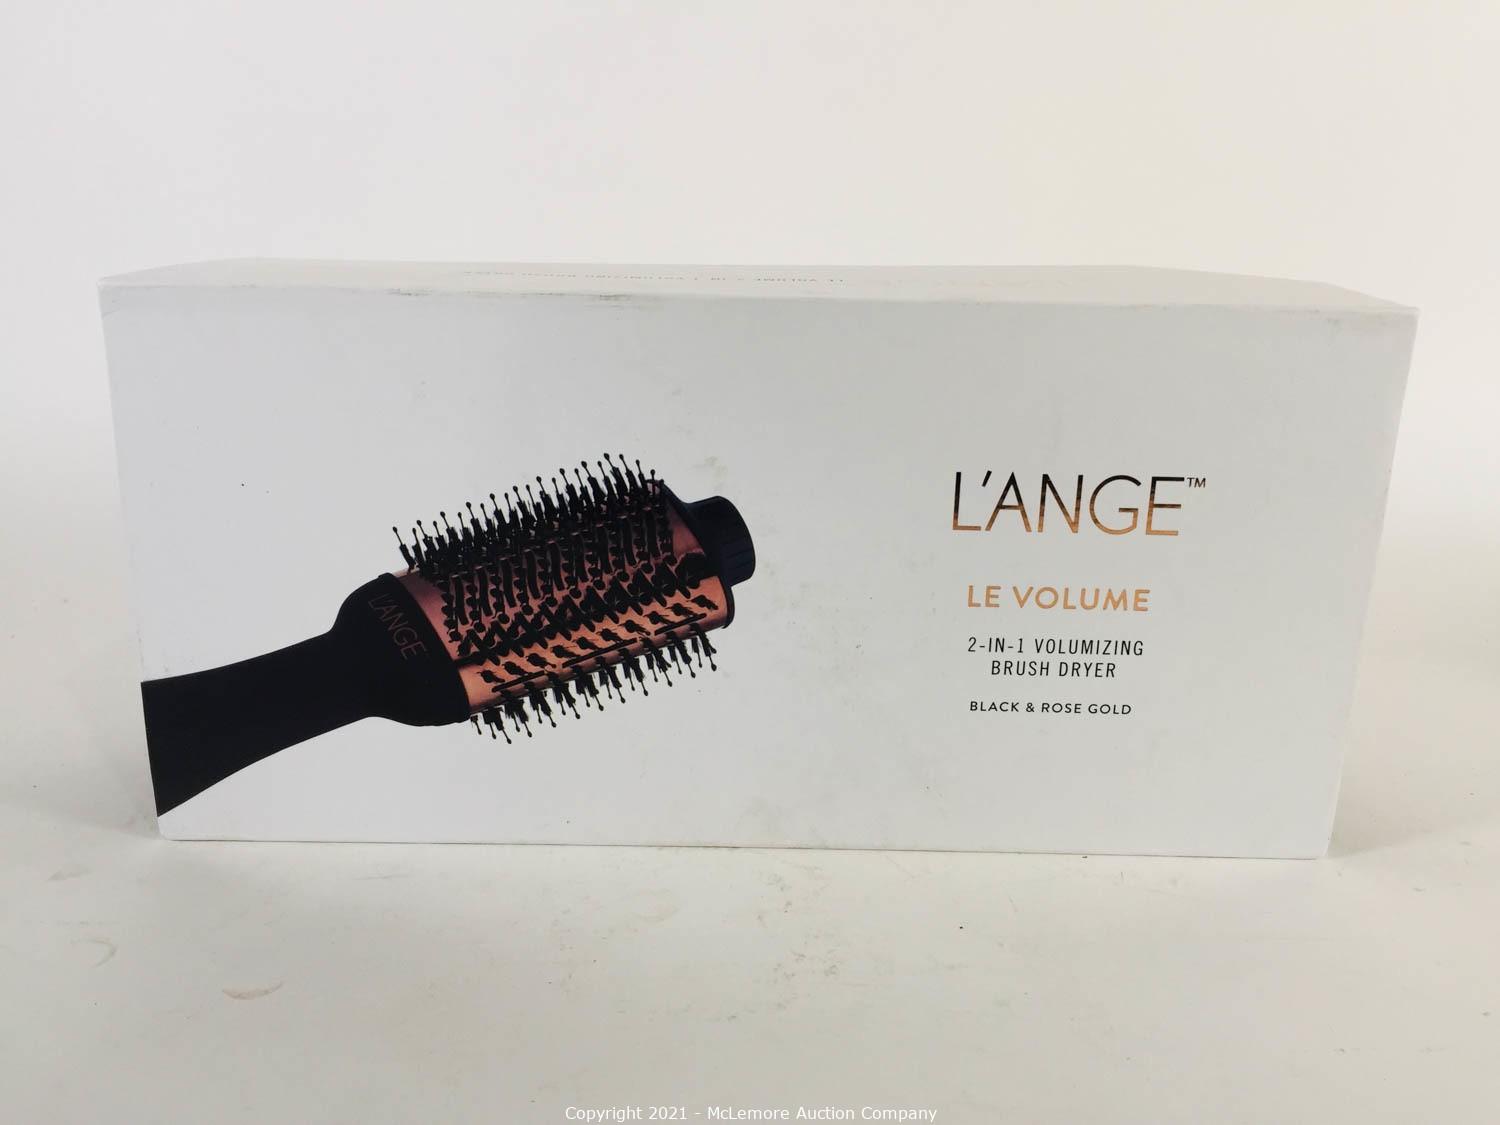 McLemore Auction Company - Auction: Electronics, Gaming, Home Goods, Beauty  Products, Toys, Power Tools, Clothing, Accessories, Appliances and More  ITEM: L'Ange Hair Le Volume 2-in-1 Volumizing Brush Blow Dryer | Black 75MM